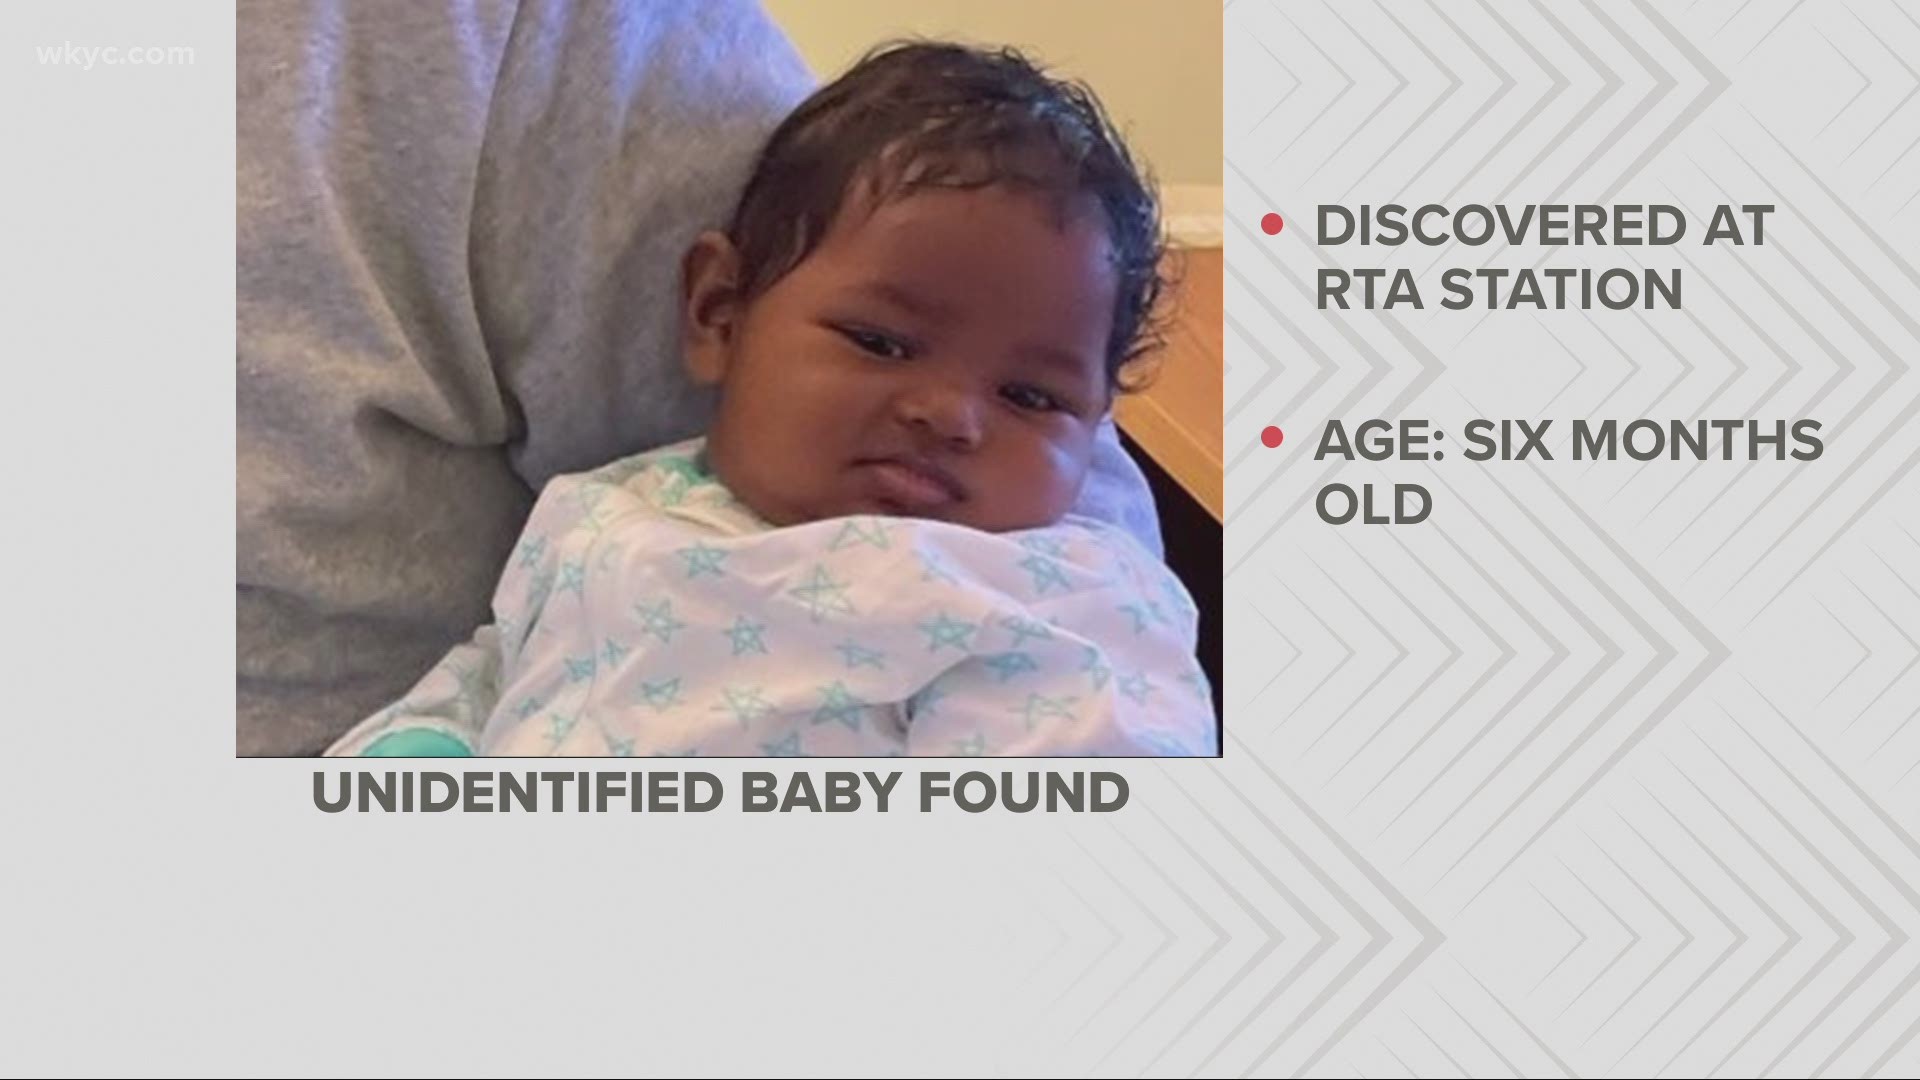 Cuyahoga County officials say RTA police found the baby on Saturday with an adult. They are unable to verify the adult’s relationship with the child.